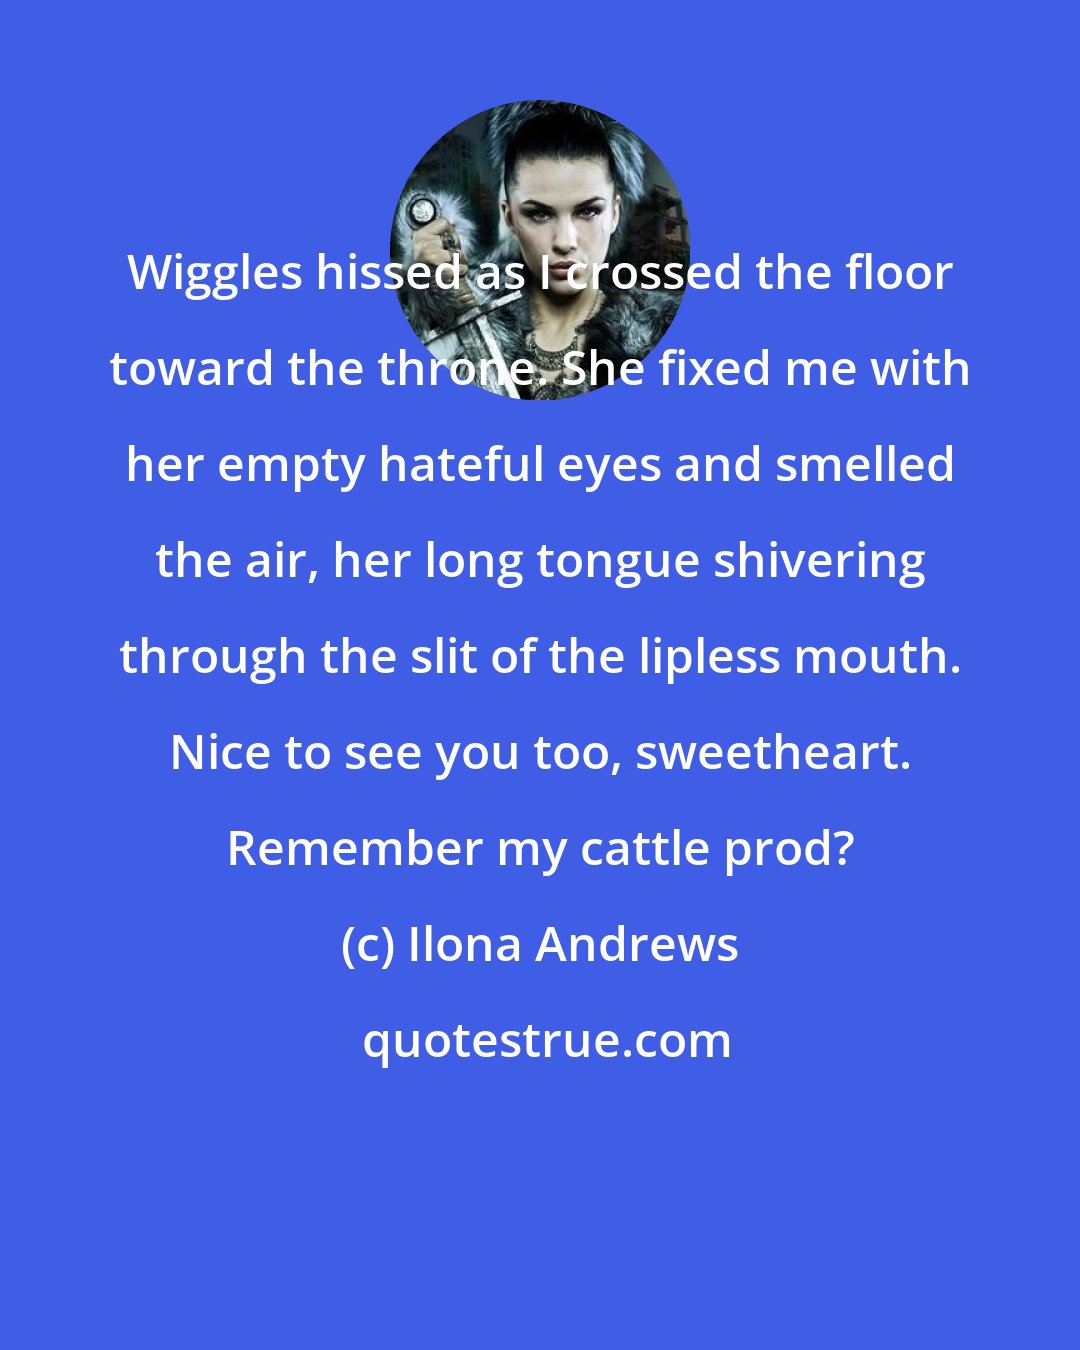 Ilona Andrews: Wiggles hissed as I crossed the floor toward the throne. She fixed me with her empty hateful eyes and smelled the air, her long tongue shivering through the slit of the lipless mouth. Nice to see you too, sweetheart. Remember my cattle prod?